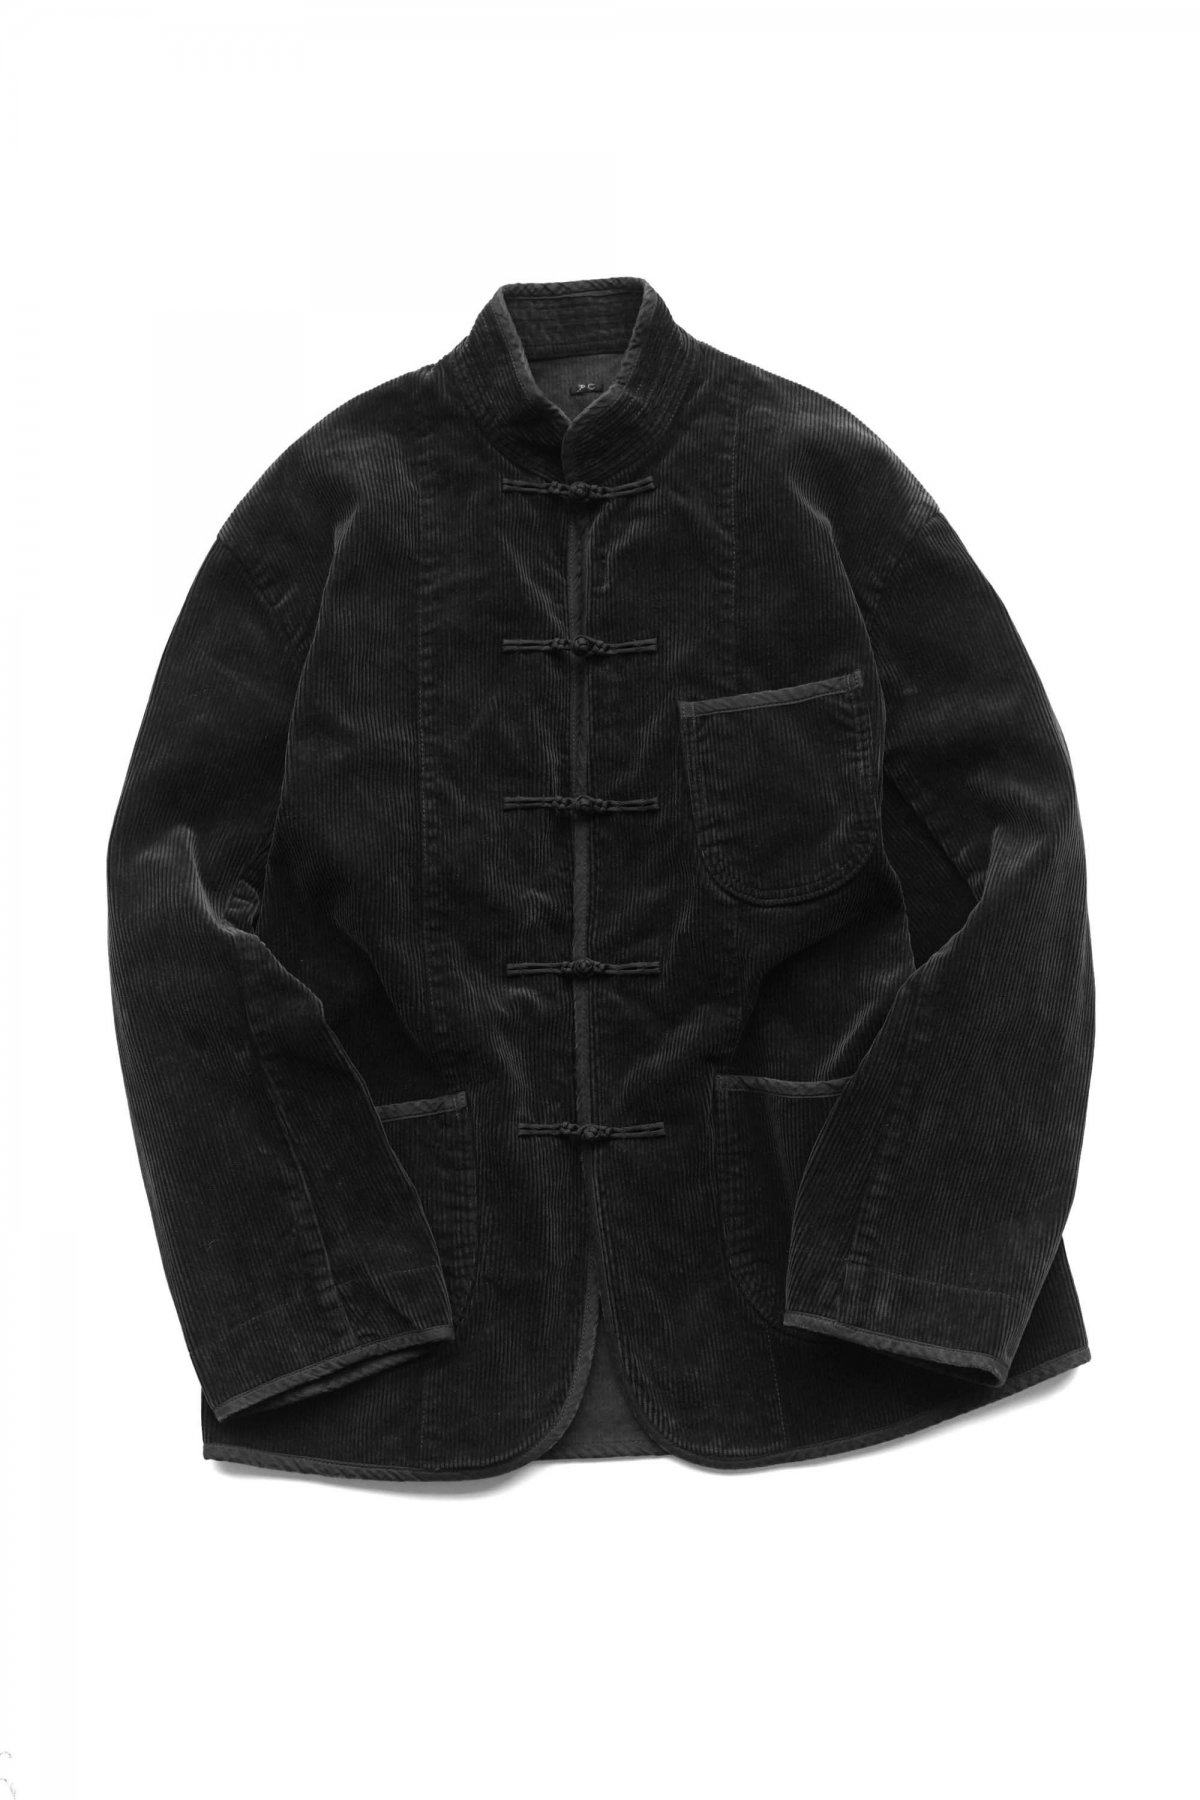 Porter Classic - CORDUROY CHINESE JACKET - WATCH CHAIN ITEM 